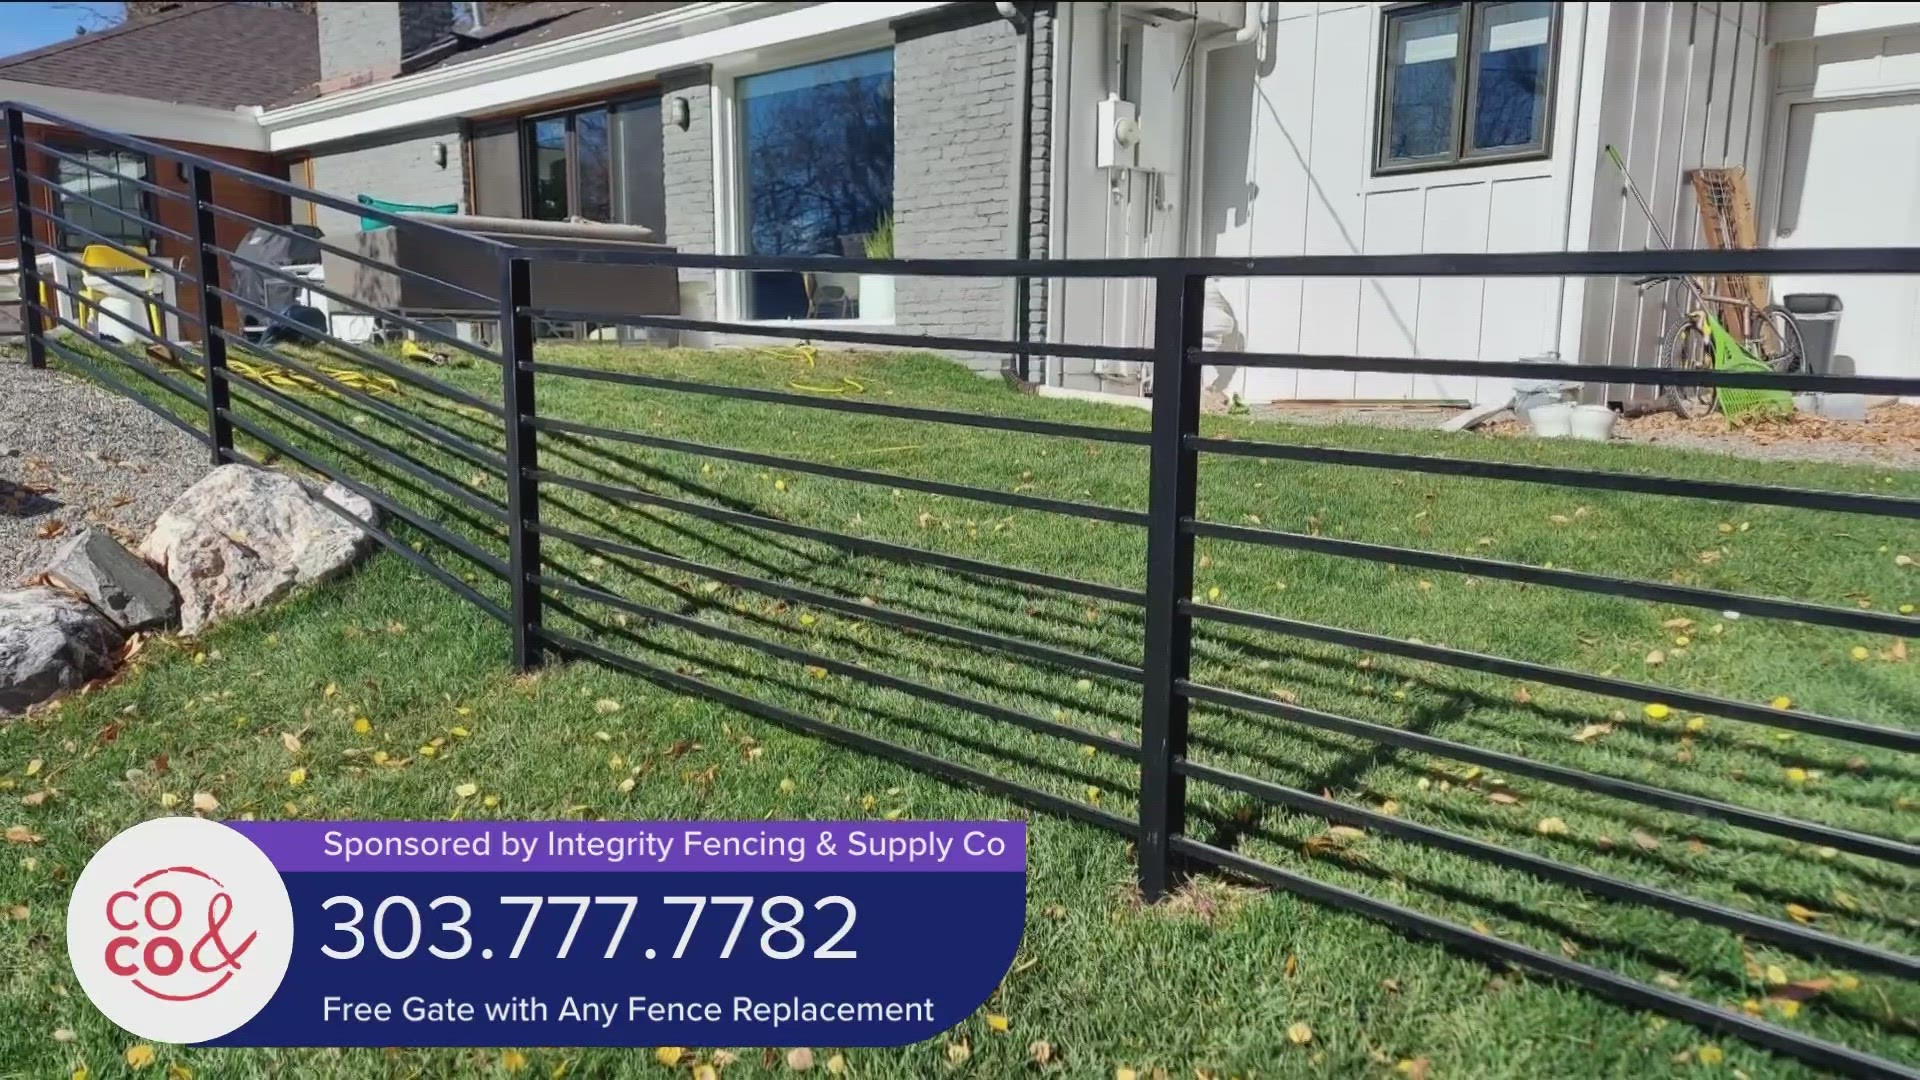 Right now you can get a free gate with any fence replacement at Integrity Fencing! Find out how else you can save at IntegrityFence.com **PAID CONTENT**